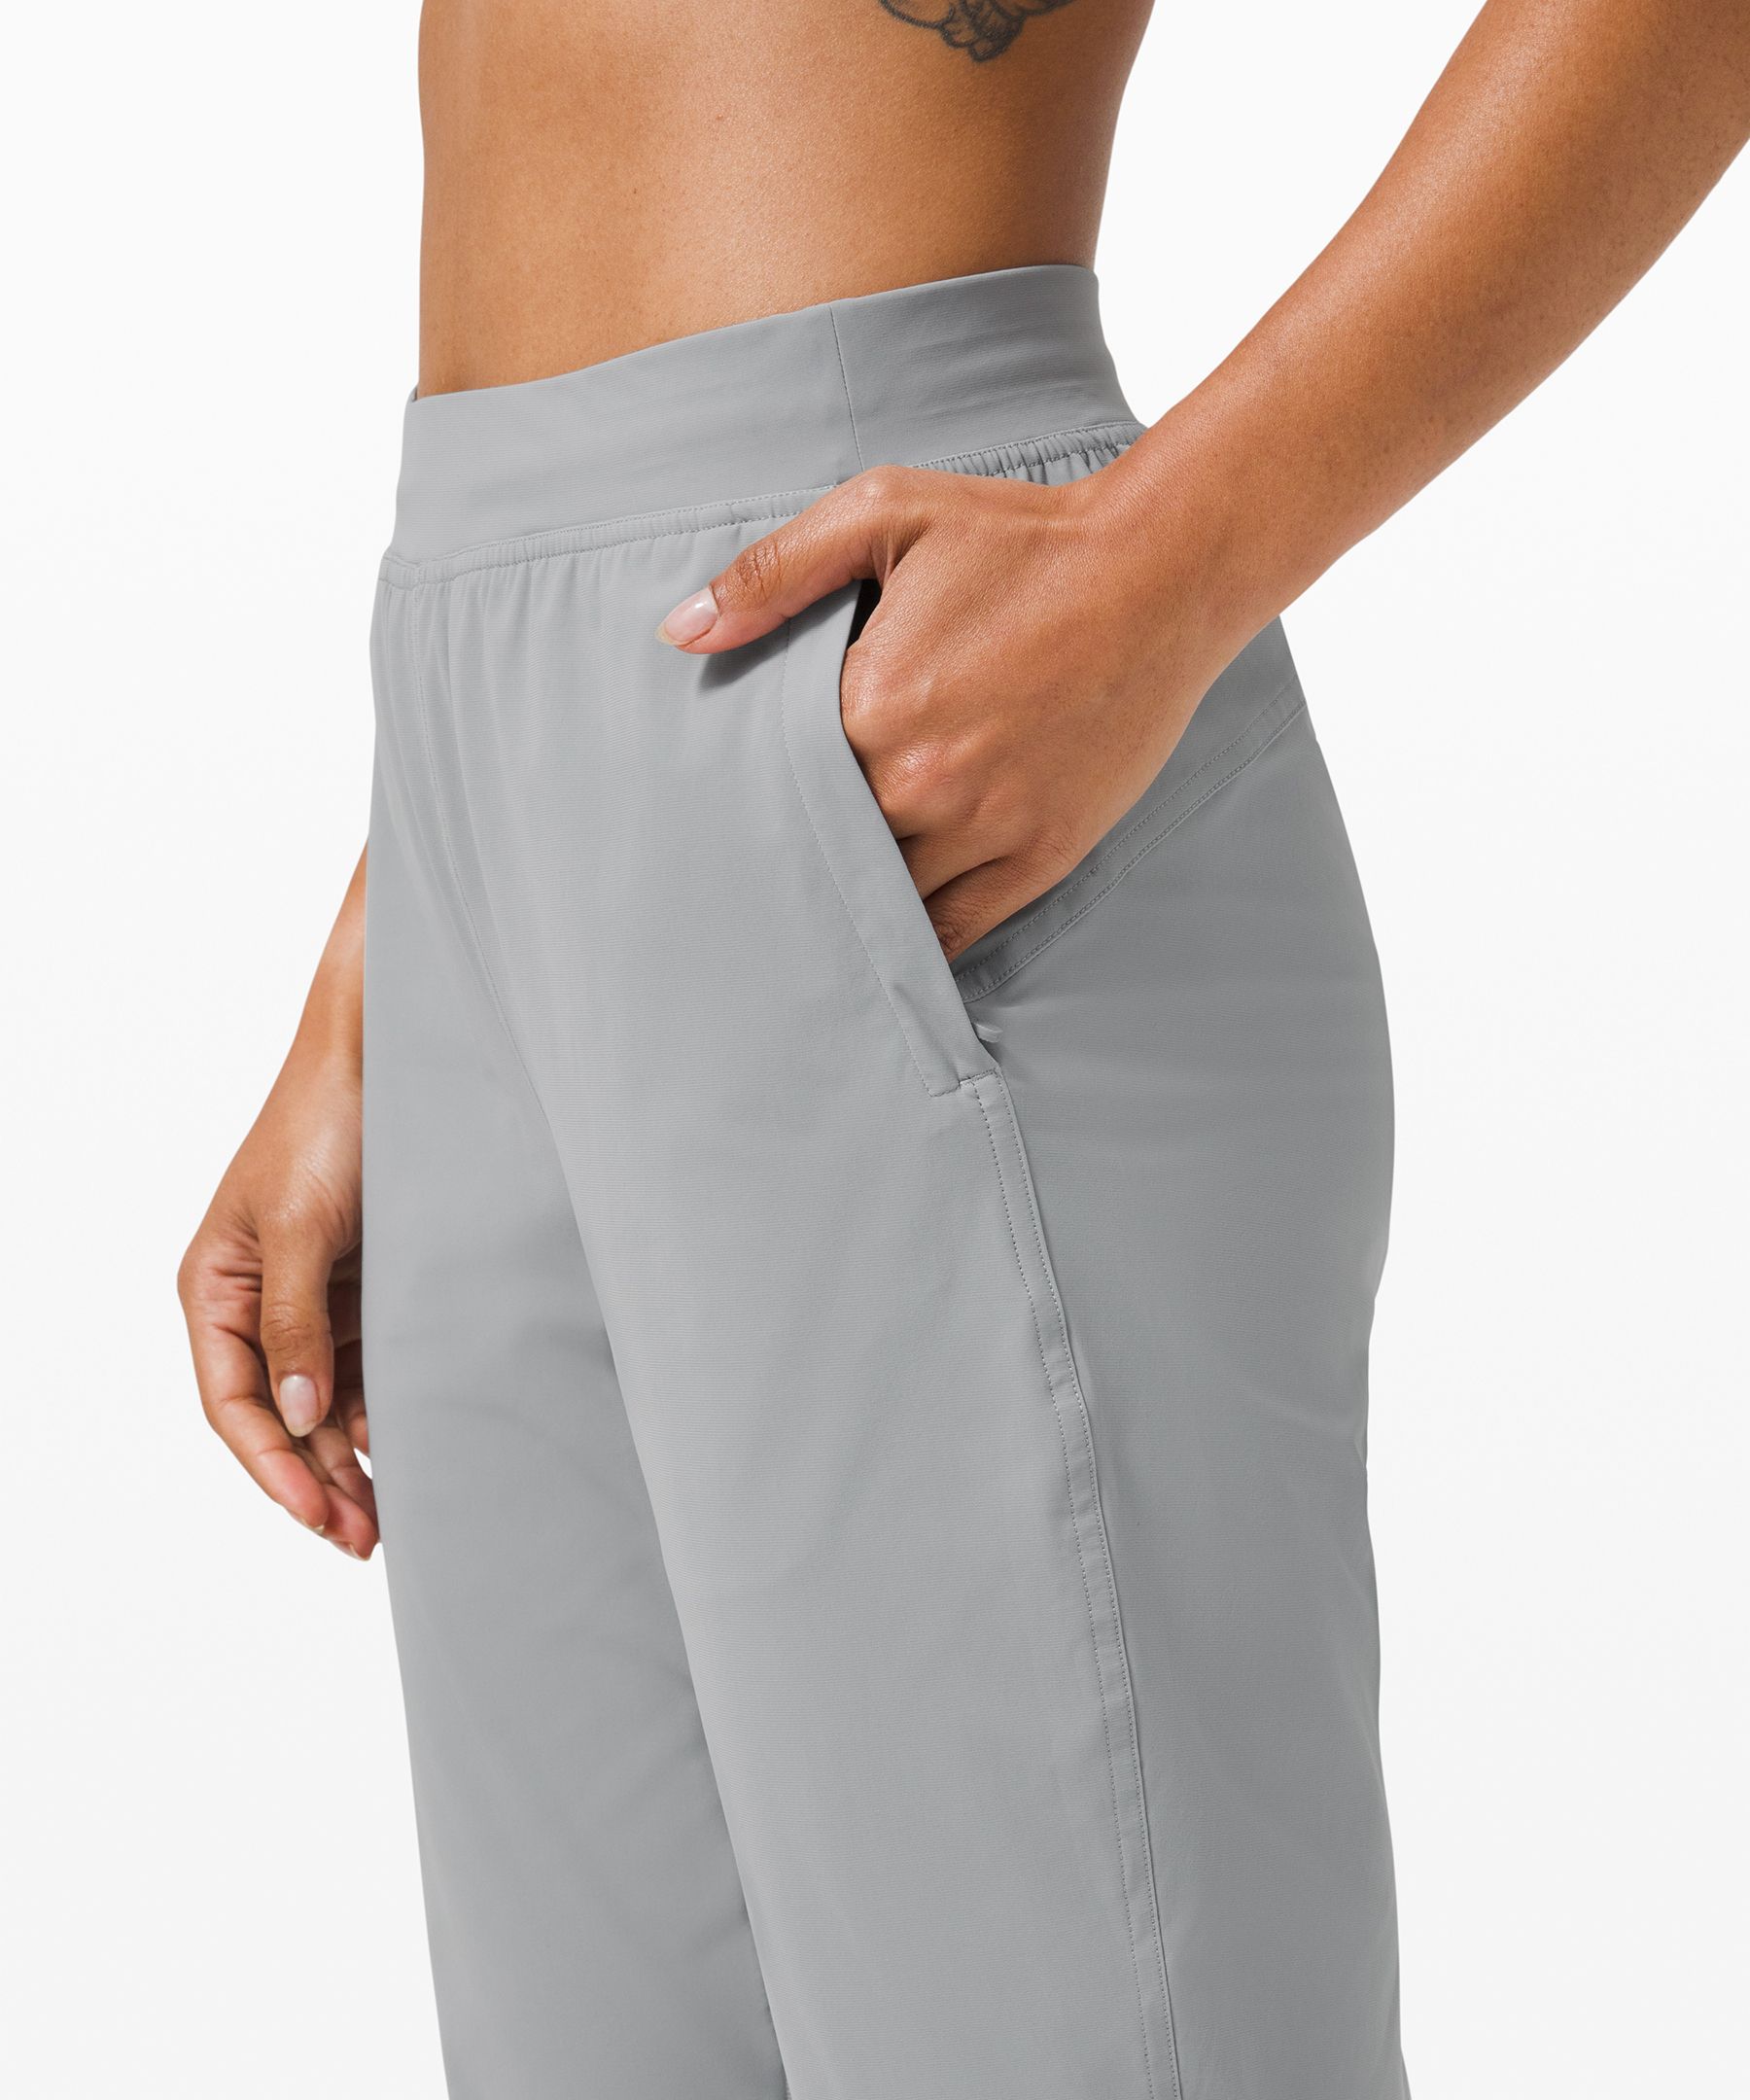 Lululemon Adapted State HR Jogger TF Zippered Pockets Size 10 Psychic  52655.